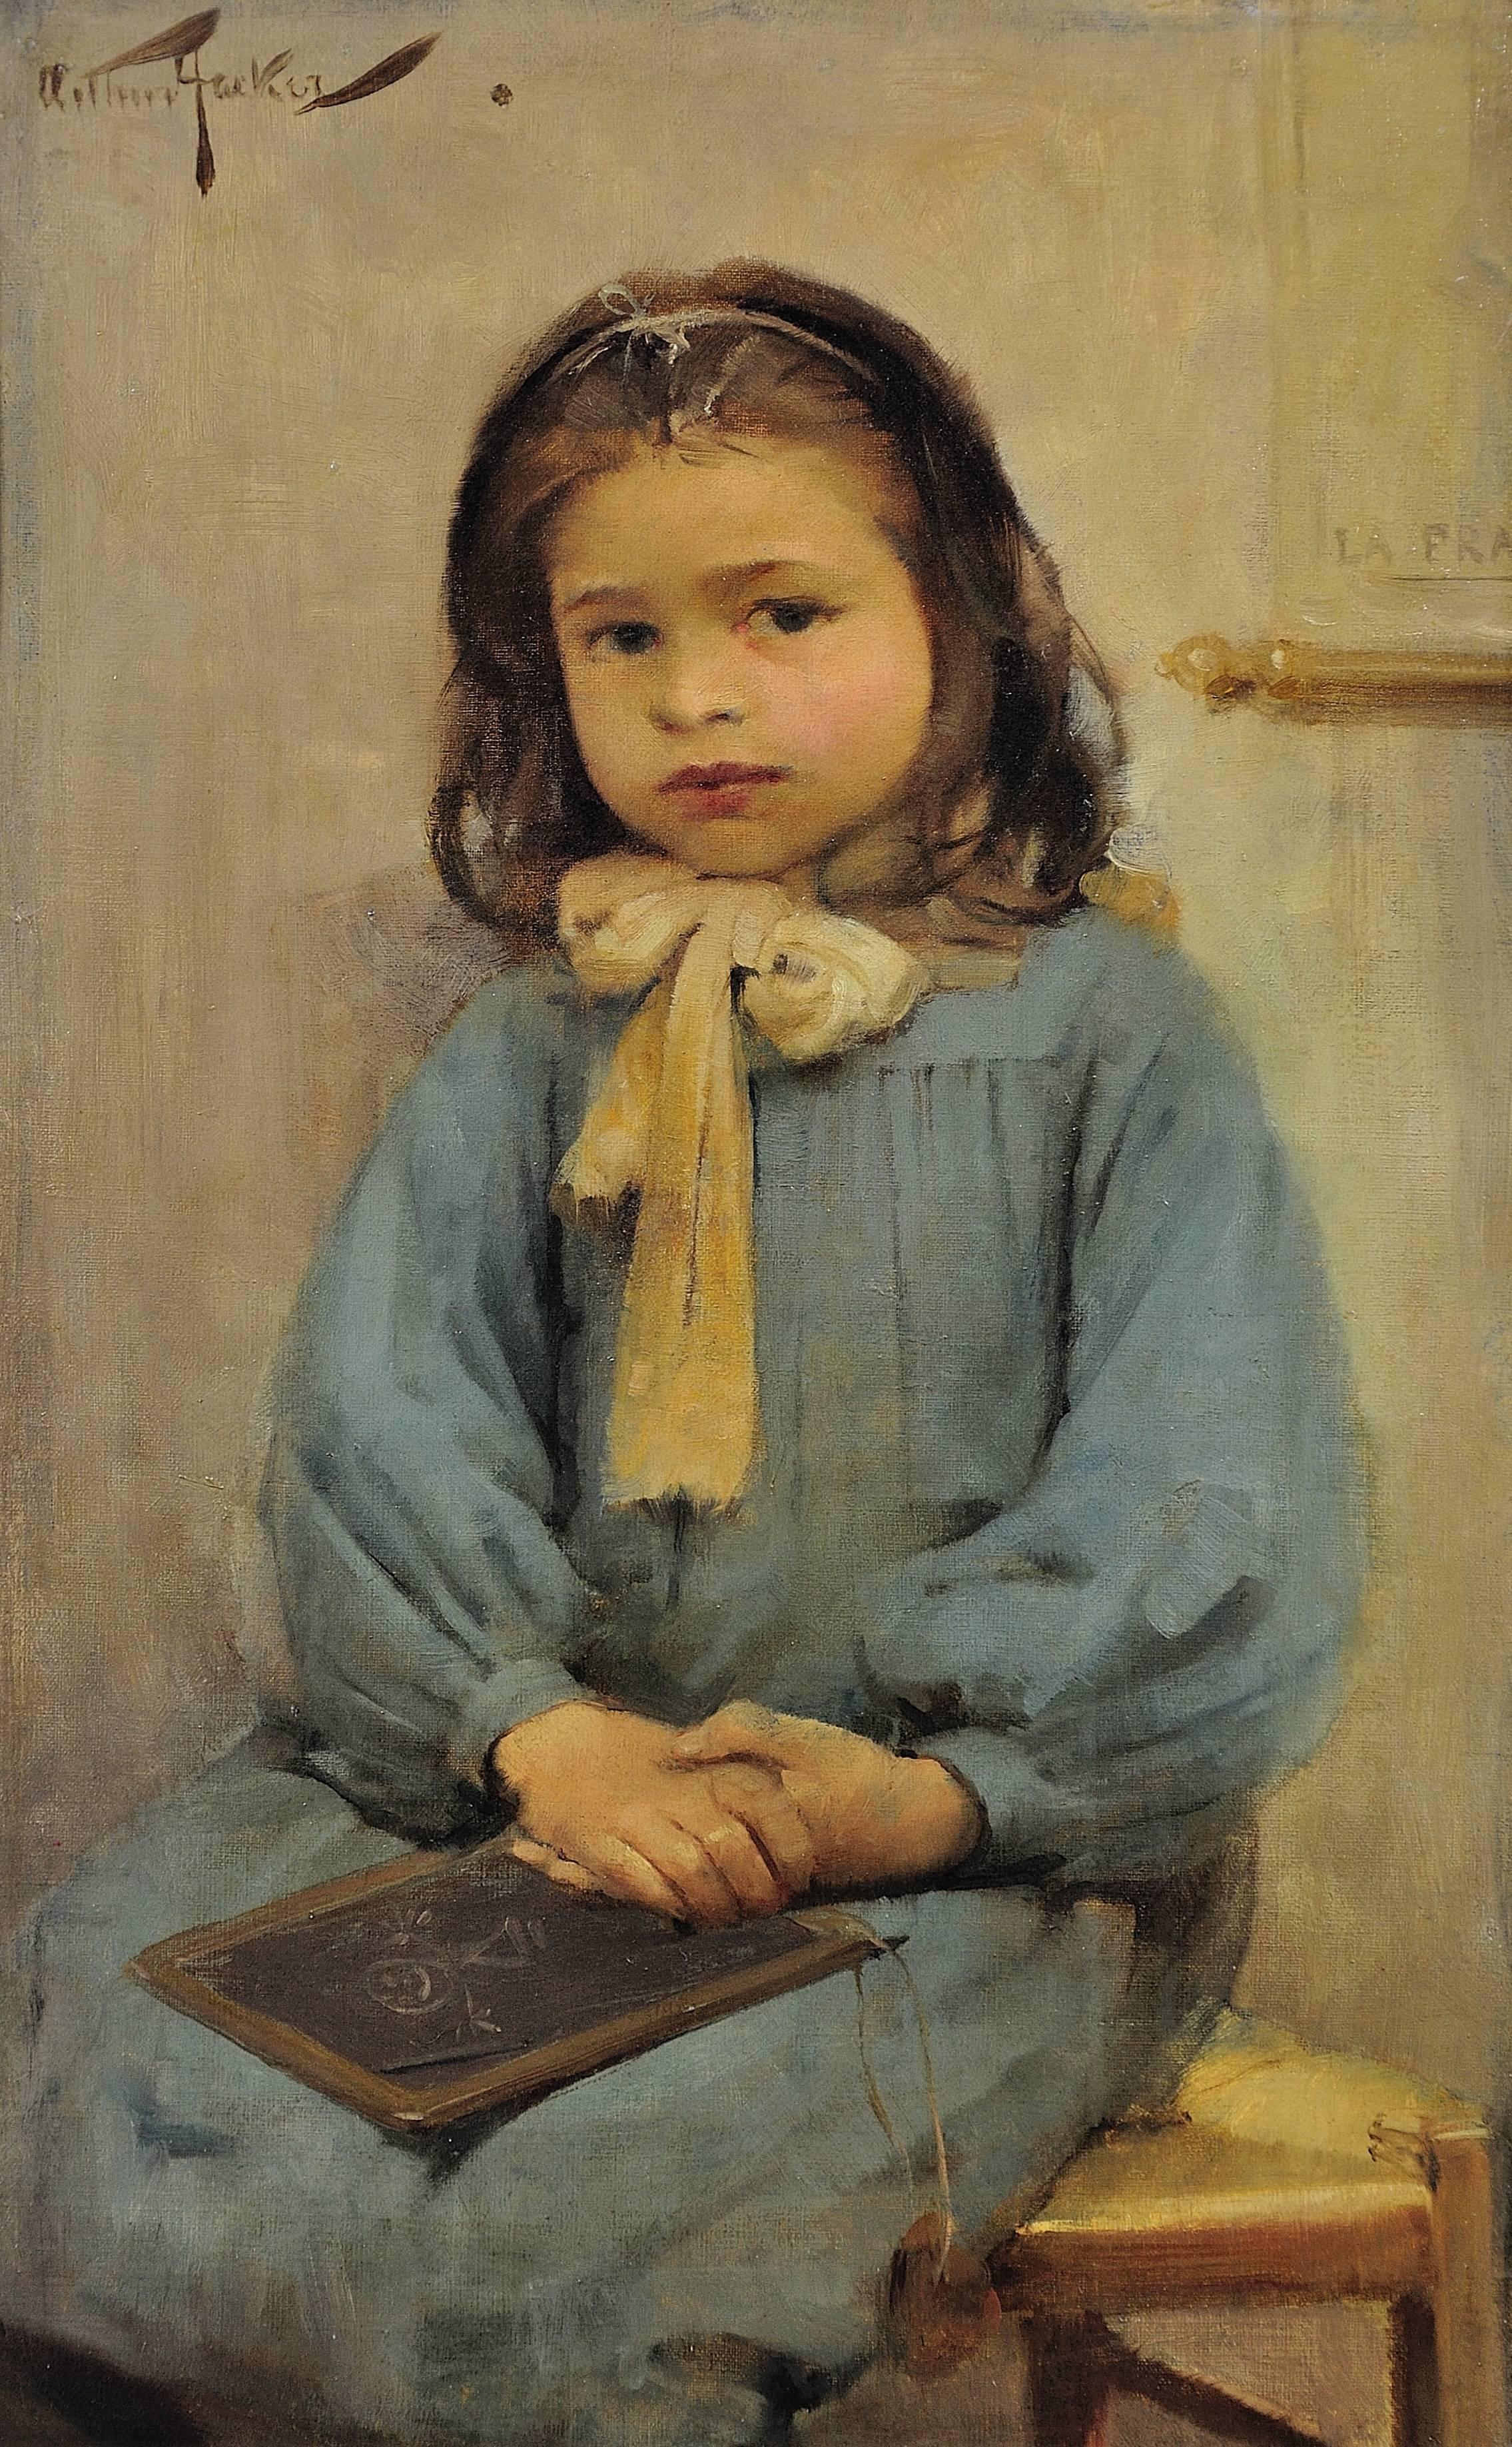 French schoolgirl - Painting by Arthur Hacker